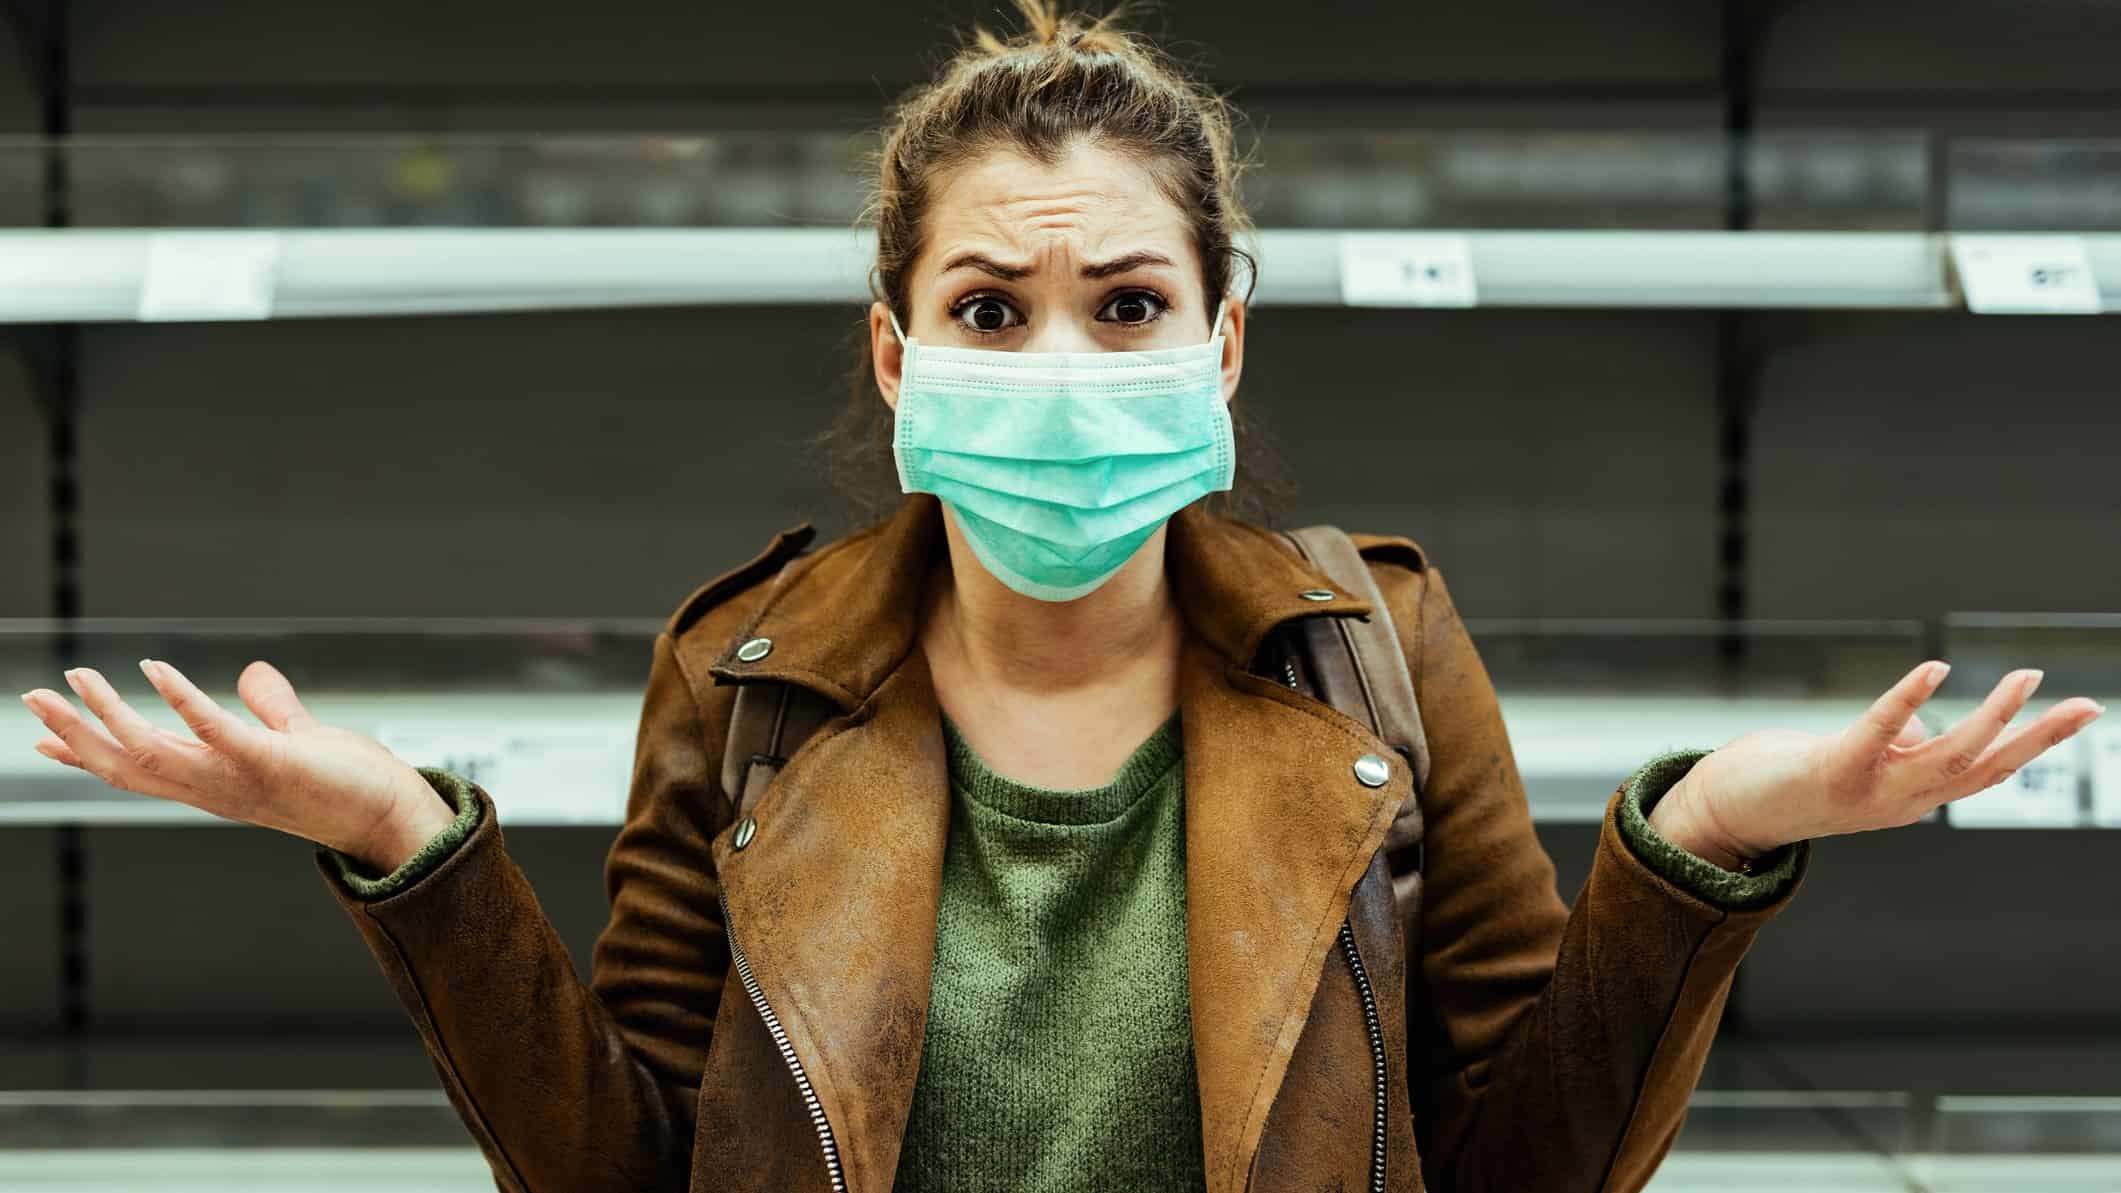 Shocked woman with protective mask gesturing while standing in front of empty shelf at supermarket during coronavirus pandemic.